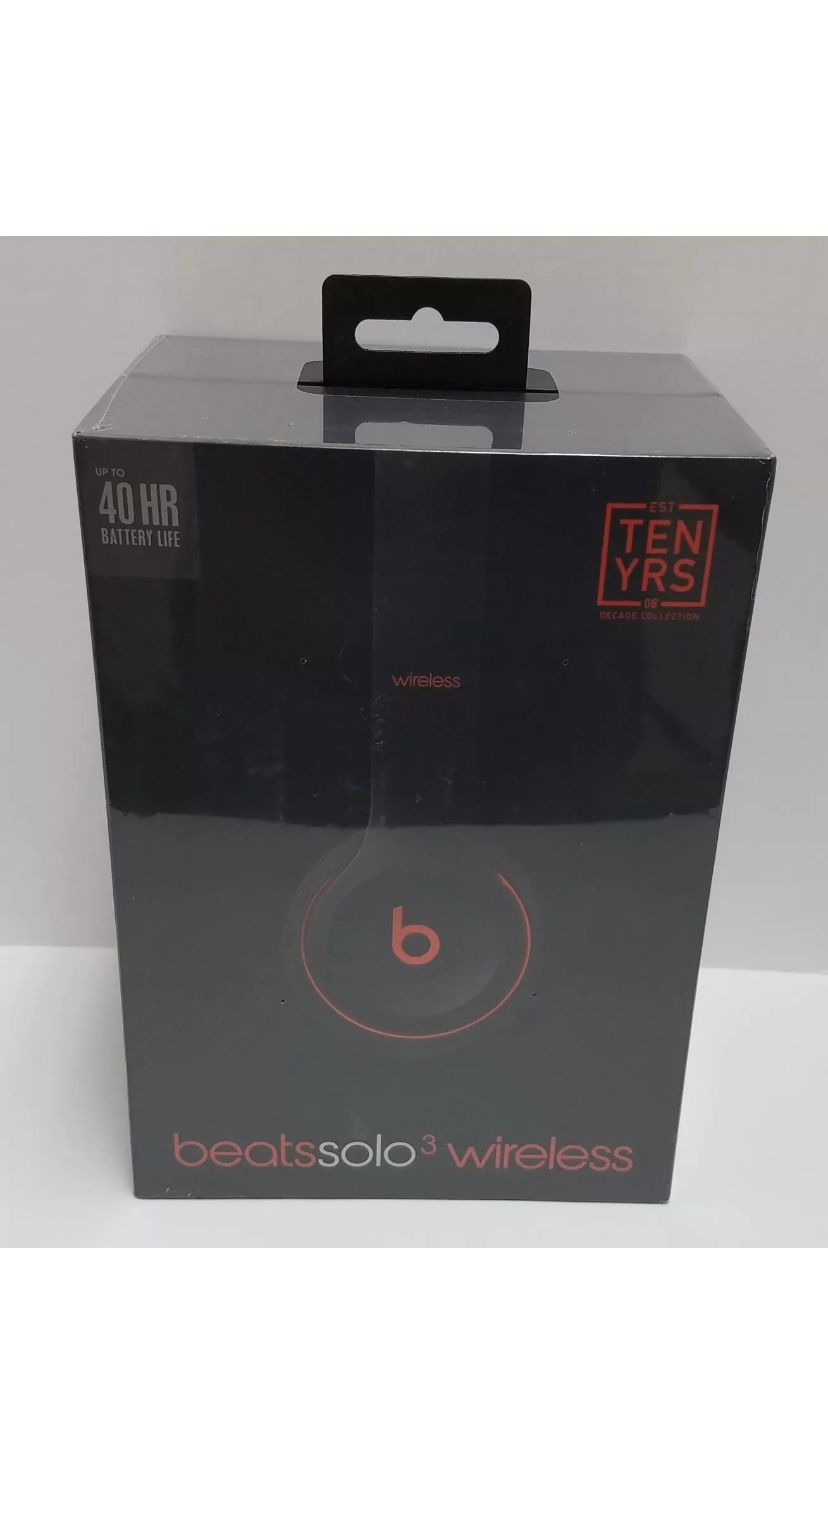 NEW Apple Beats Solo 3 Decades Collection Wireless Headphones Red-Black DEFIANT